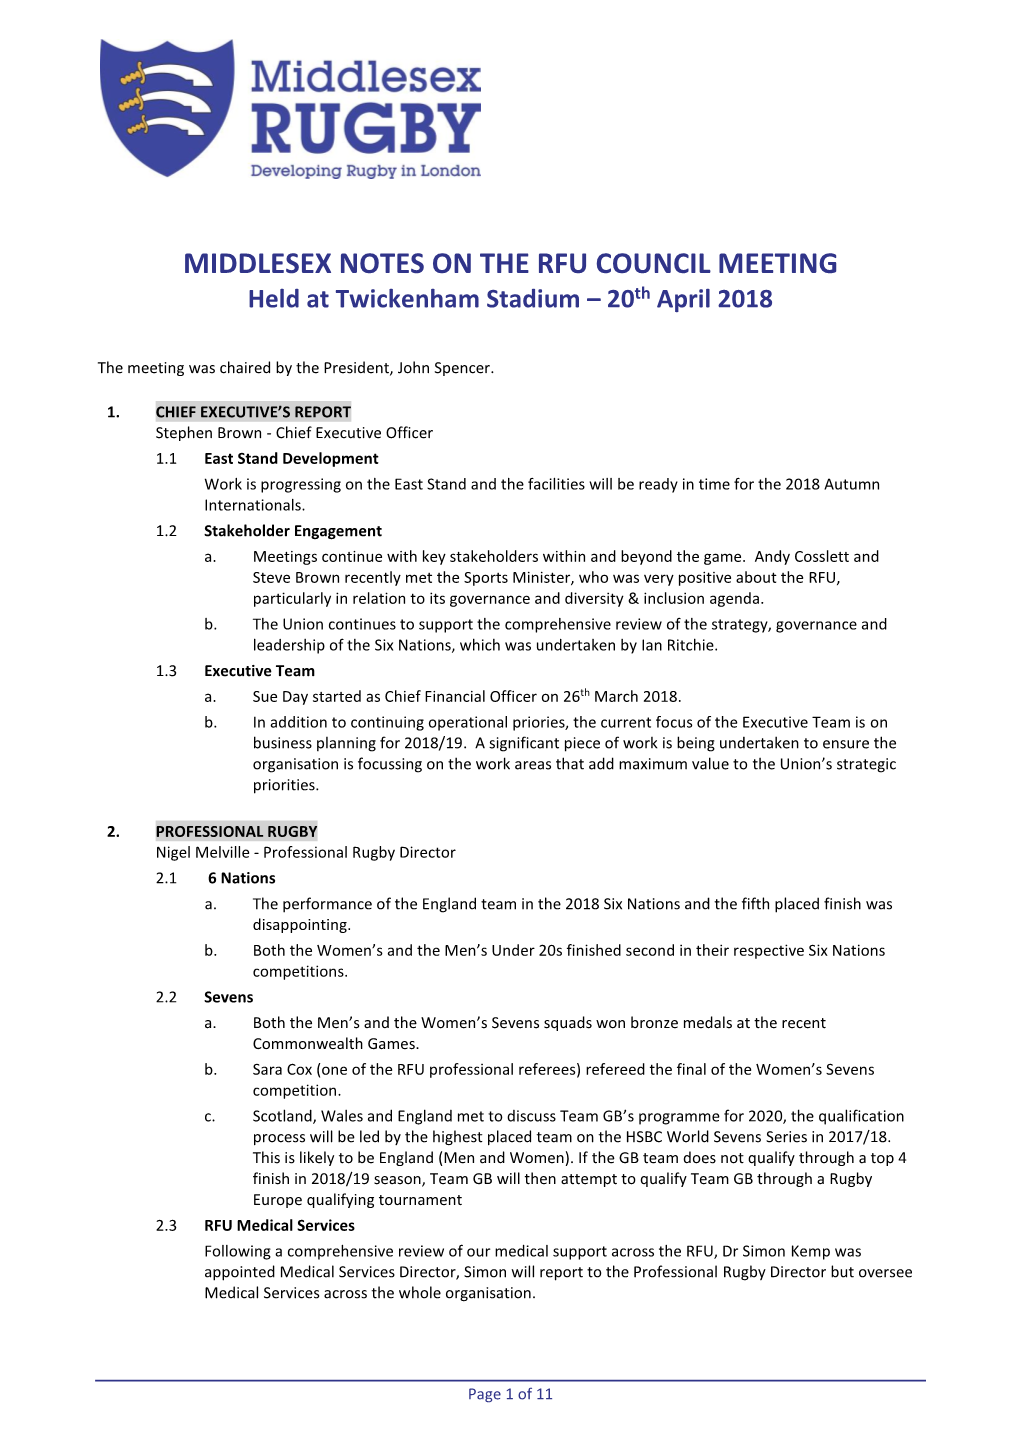 MIDDLESEX NOTES on the RFU COUNCIL MEETING Held at Twickenham Stadium – 20Th April 2018